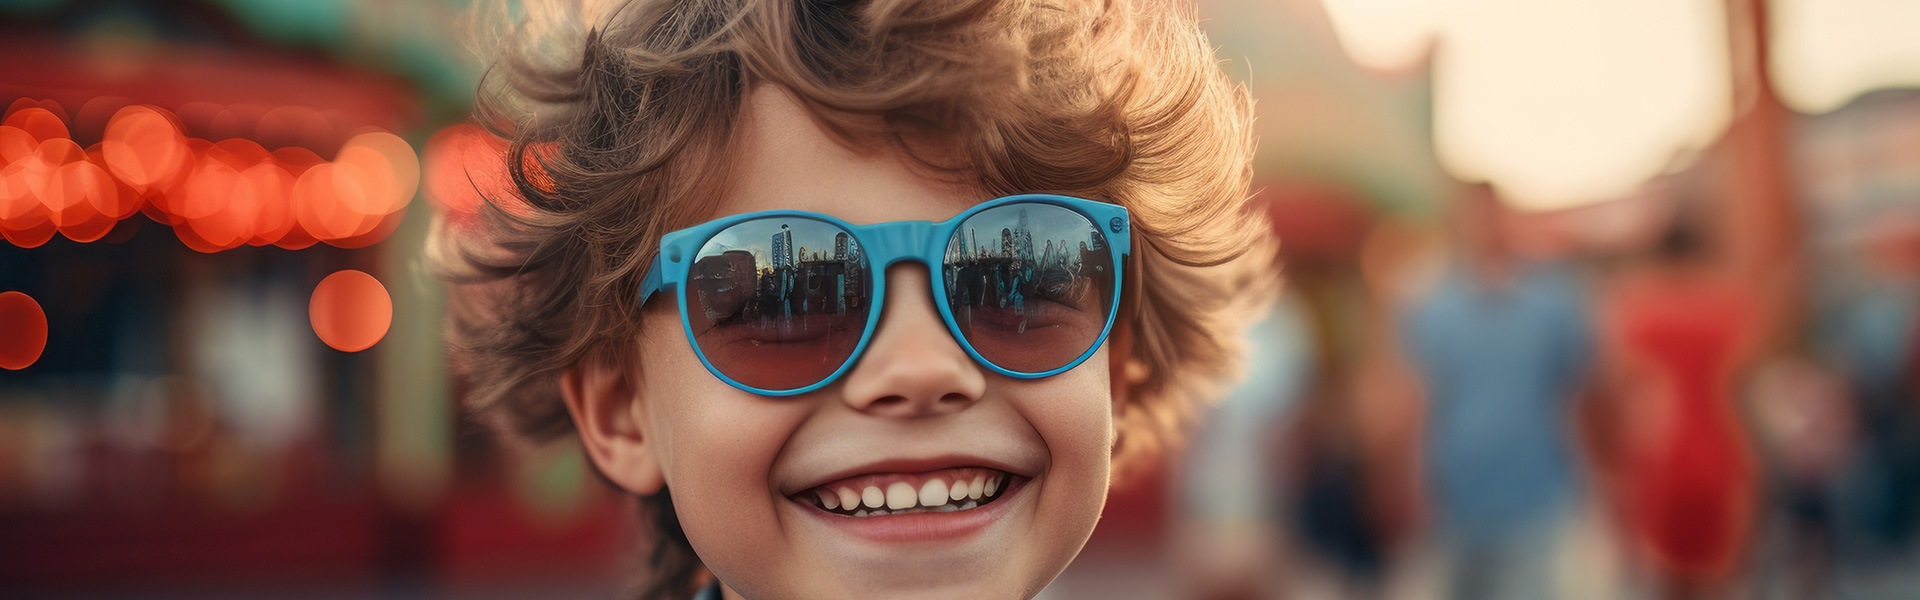 Close up portrait photography of a glad kid male wearing a trendy sunglasses against a crowded amusement park background